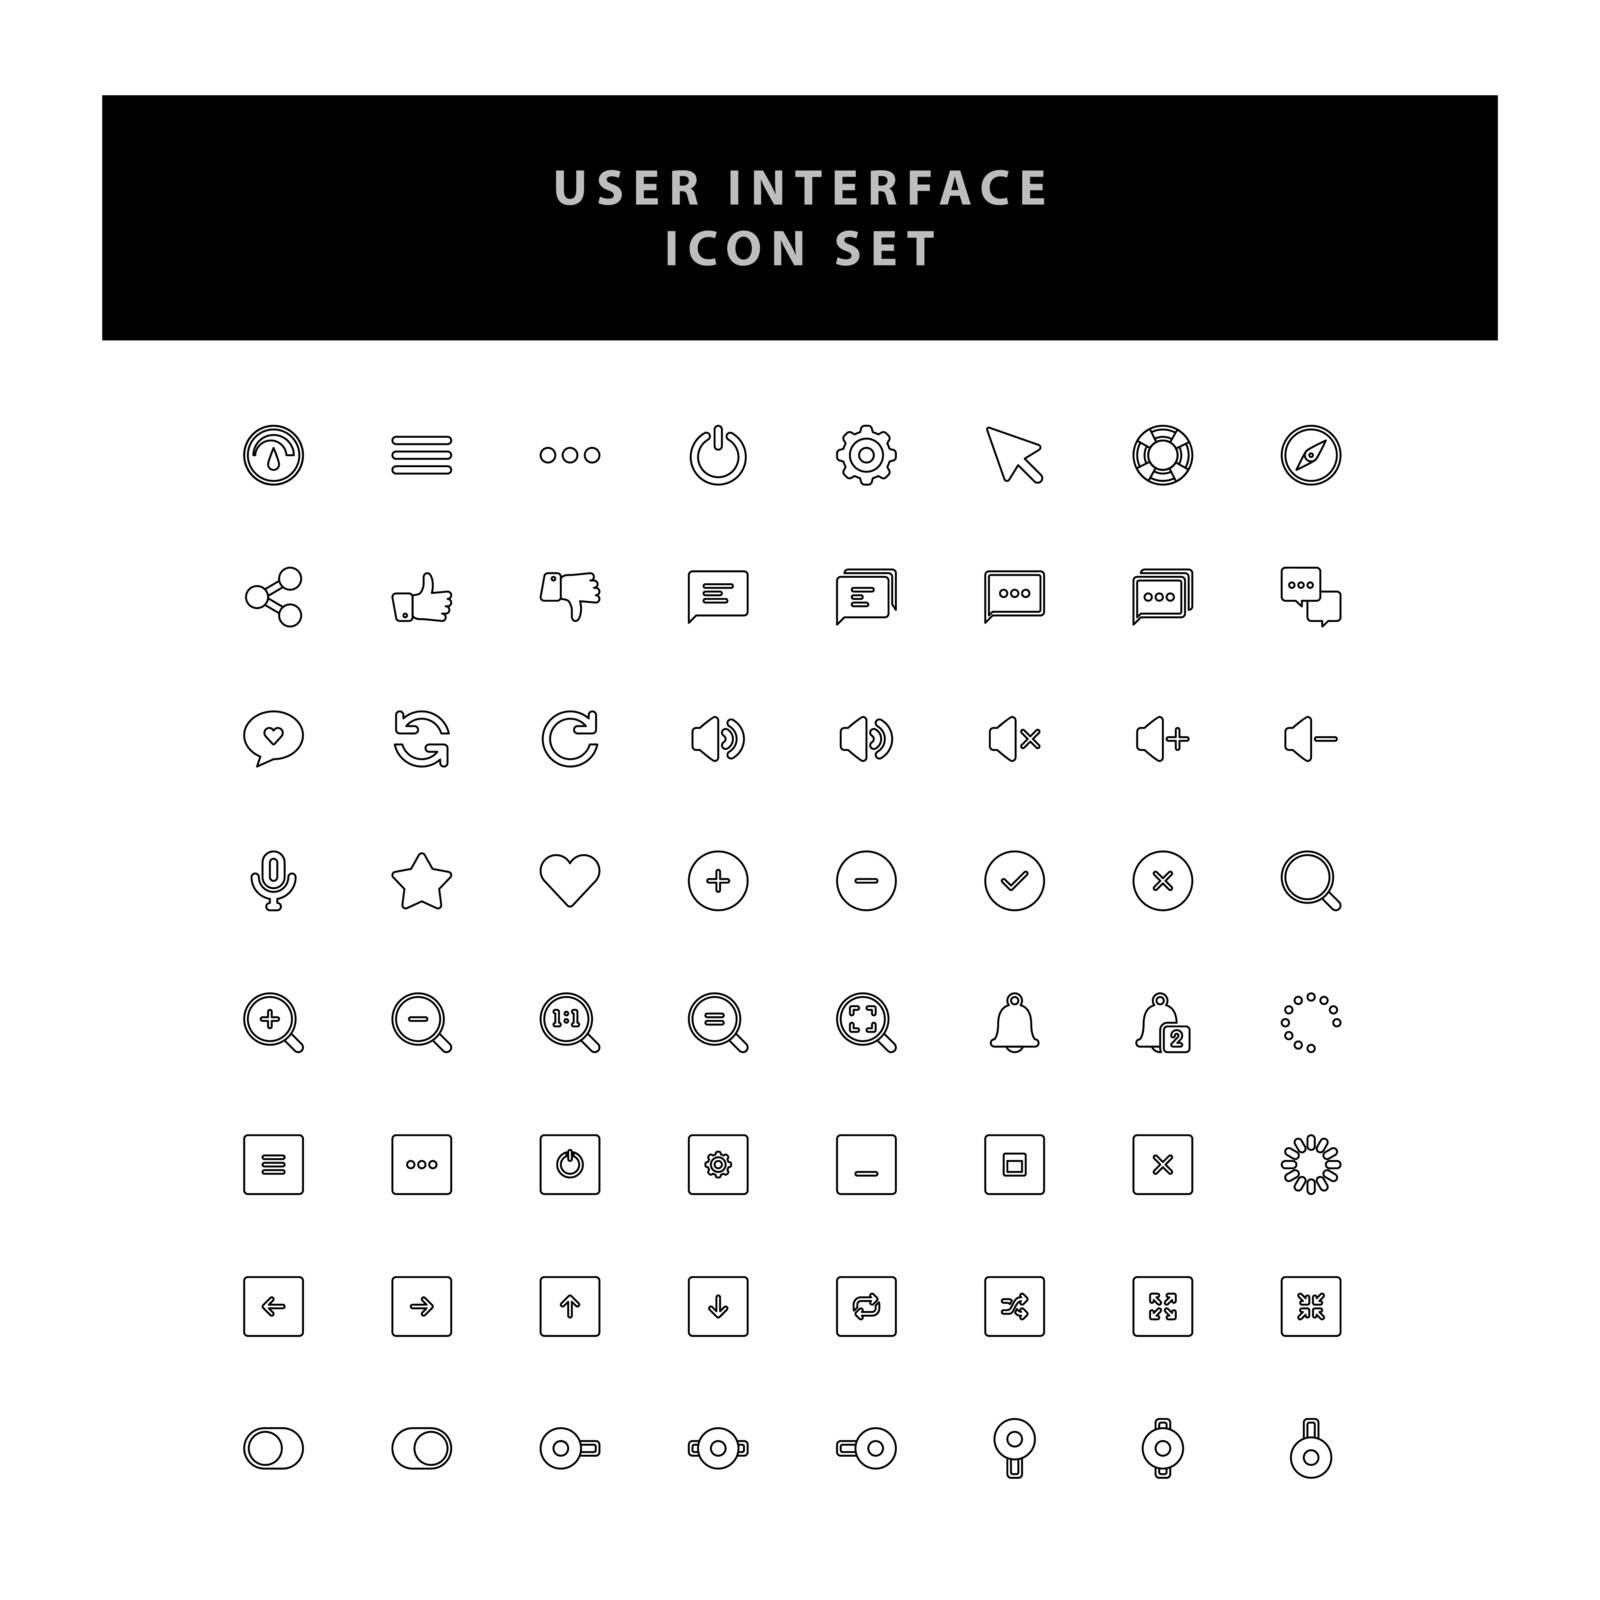 Basic user interface vector icons Set with outline design